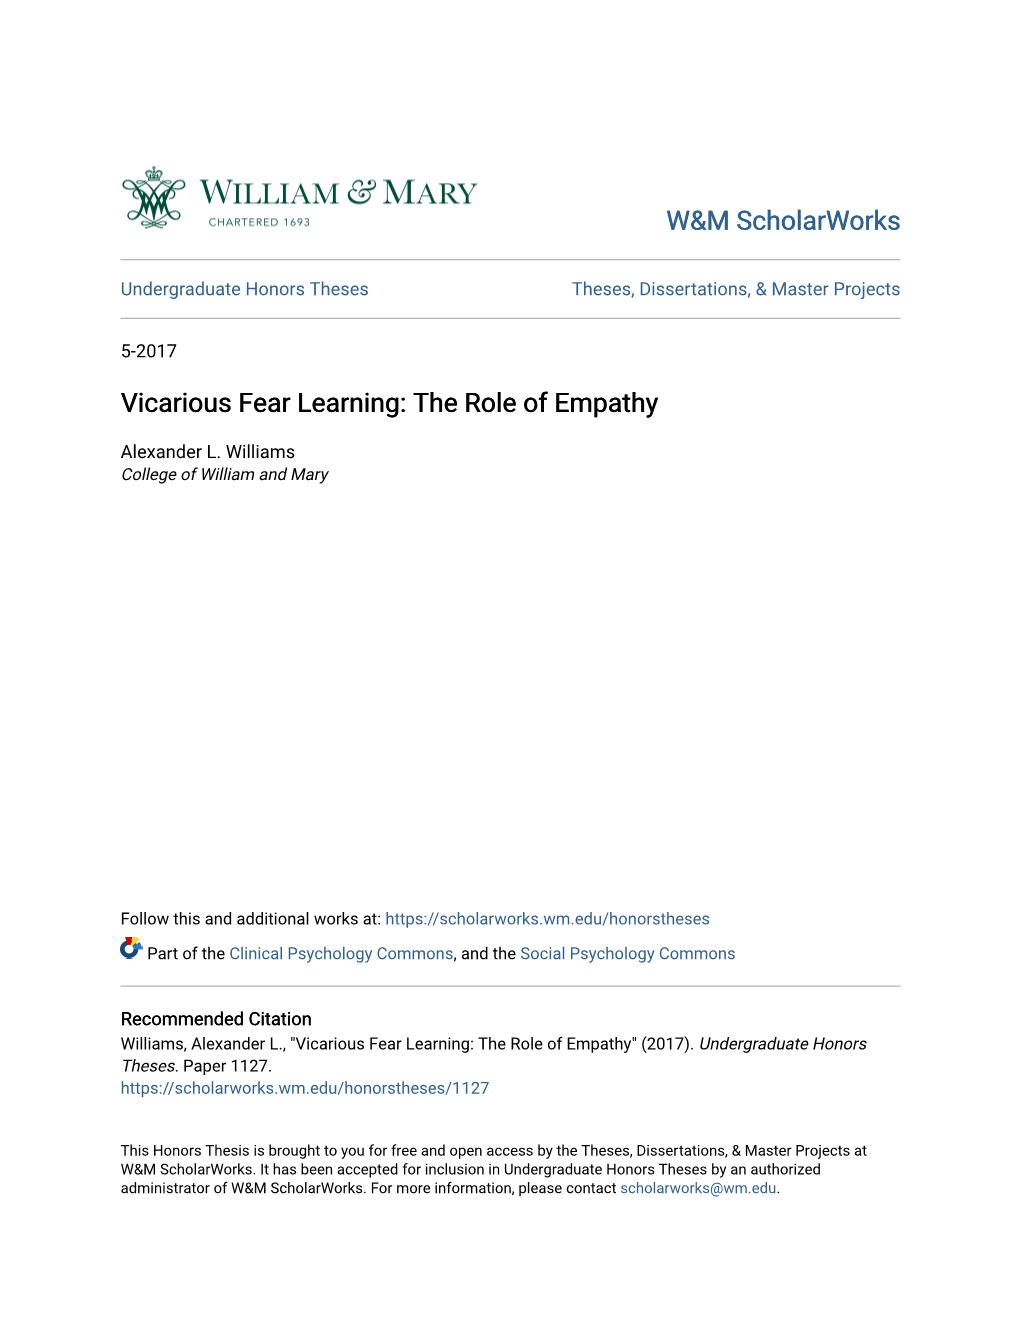 Vicarious Fear Learning: the Role of Empathy